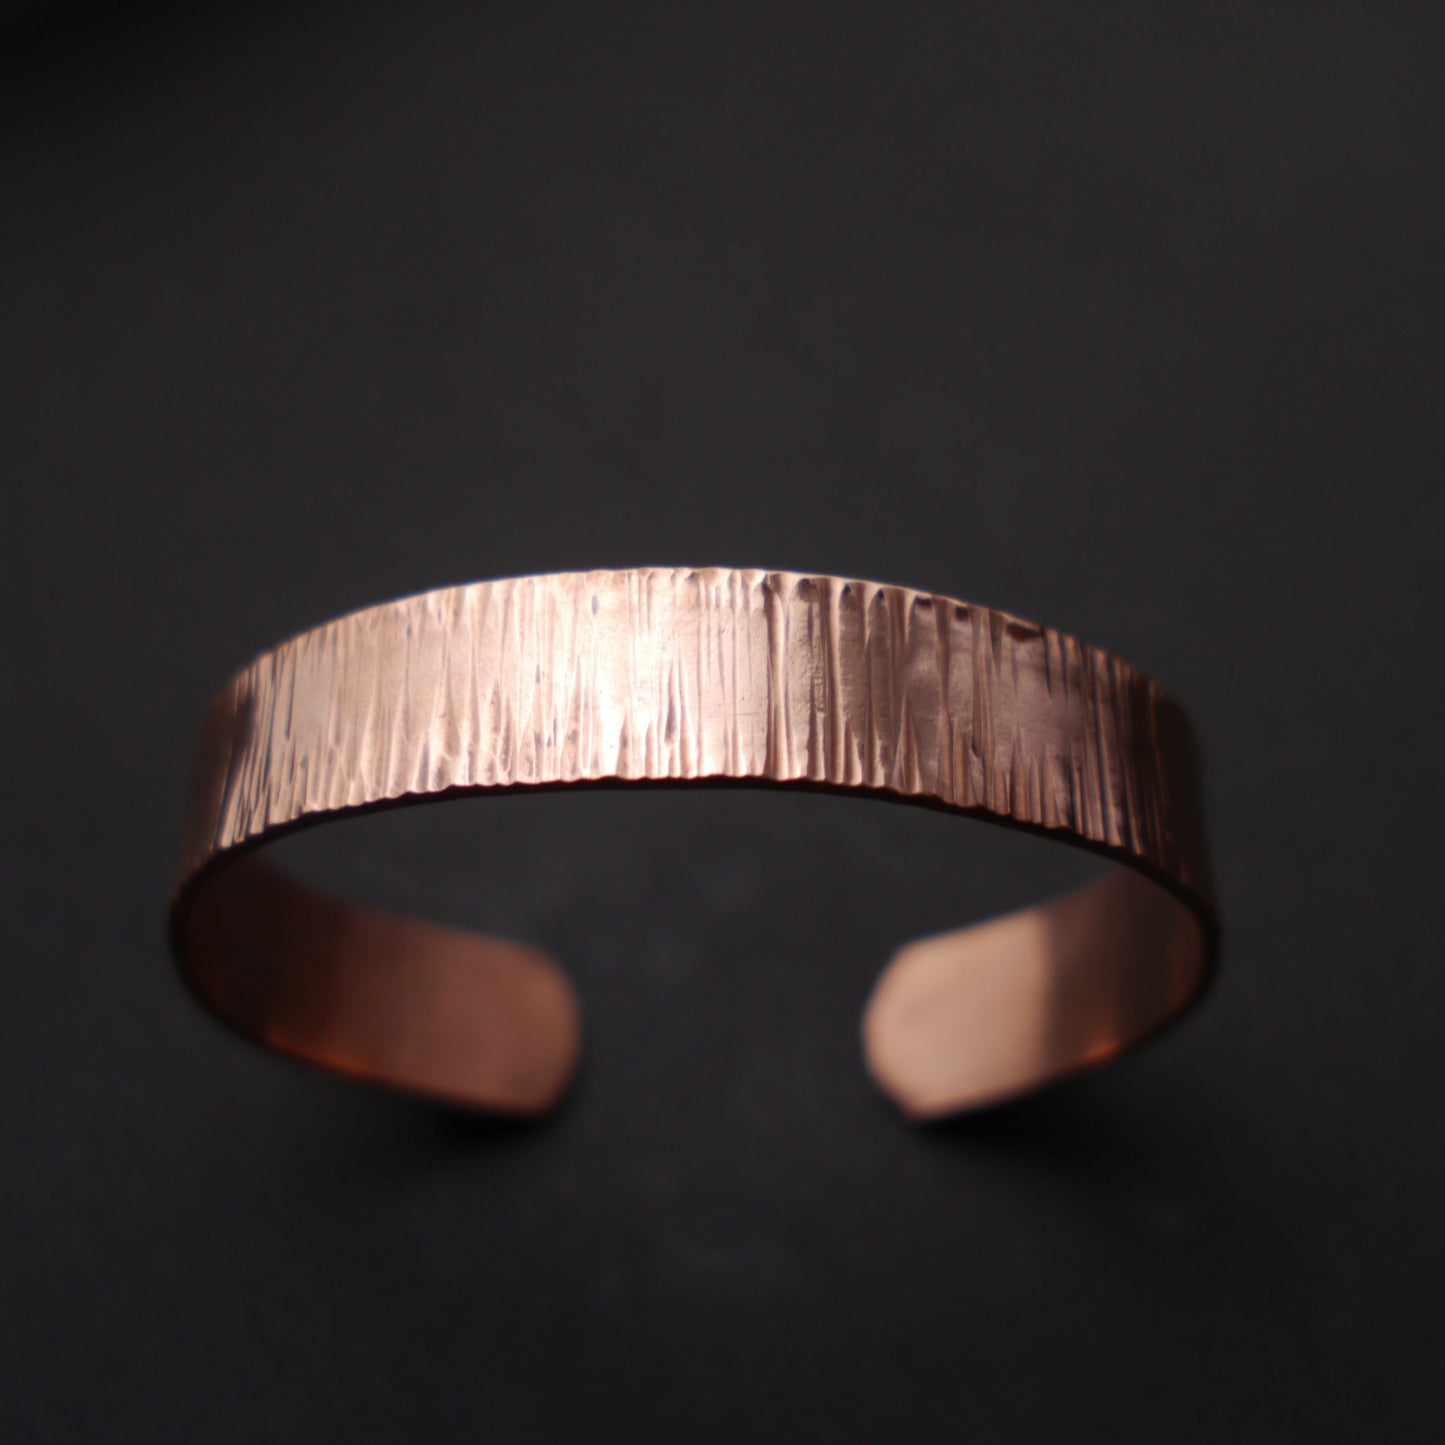 Ripple Texture Cuff in 14mm Recycled Copper